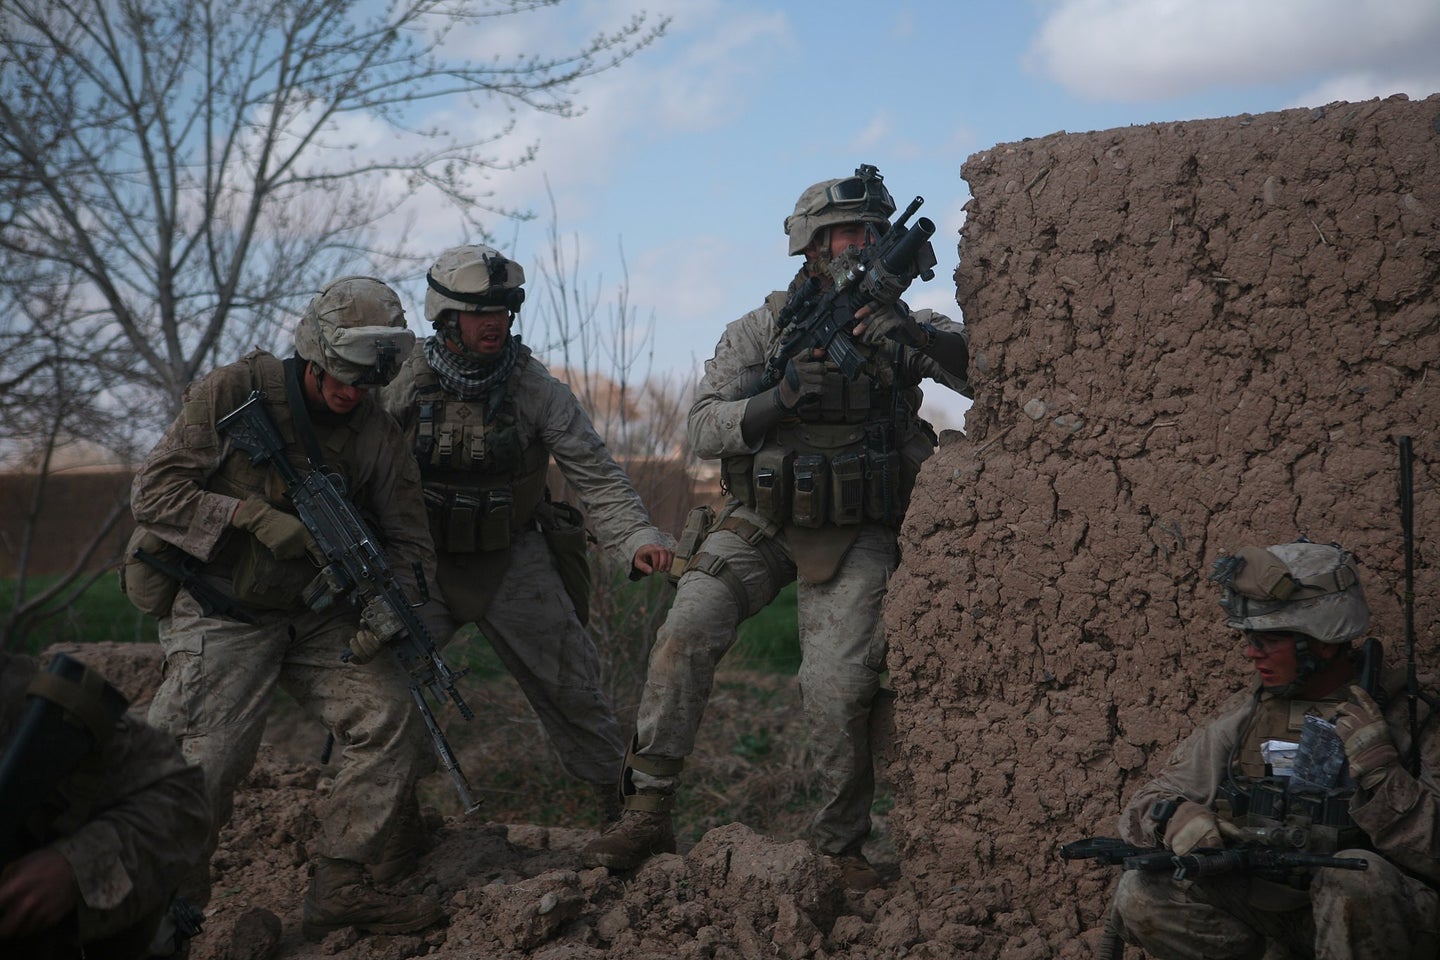 Marines with Bravo Company, 1st Battalion, 6th Marine Regiment, 2nd Marine Division, return fire during combat in Marjah, Afghanistan, Feb. 22, 2010. Marines and sailors with 1/6 took part in Operation Moshtarak, the second largest offensive in the history of Operation Enduring Freedom, aimed at wresting the city of Marjah from Taliban control. (U.S. Marine Corps photo by A.J. Lugo.)